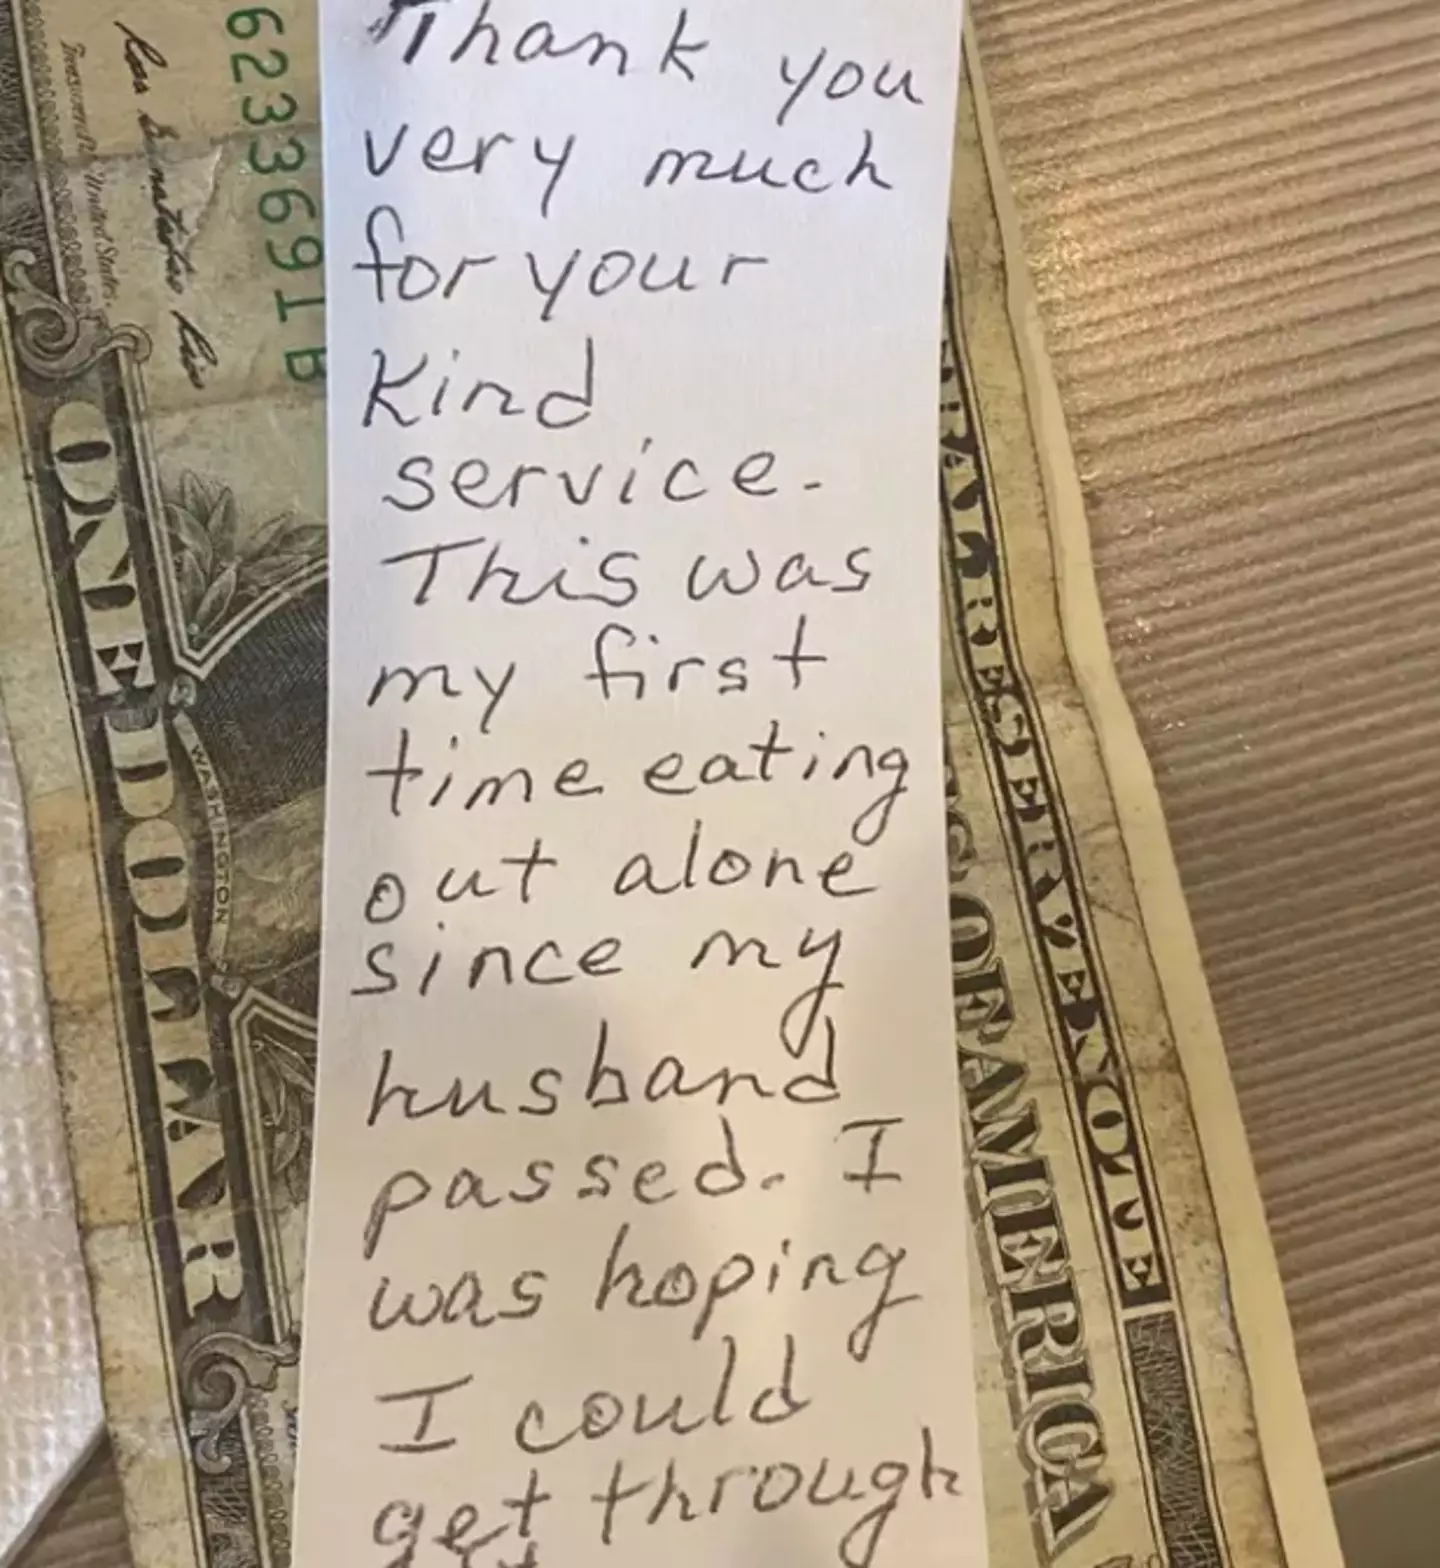 The sweet note was left along with a tip (